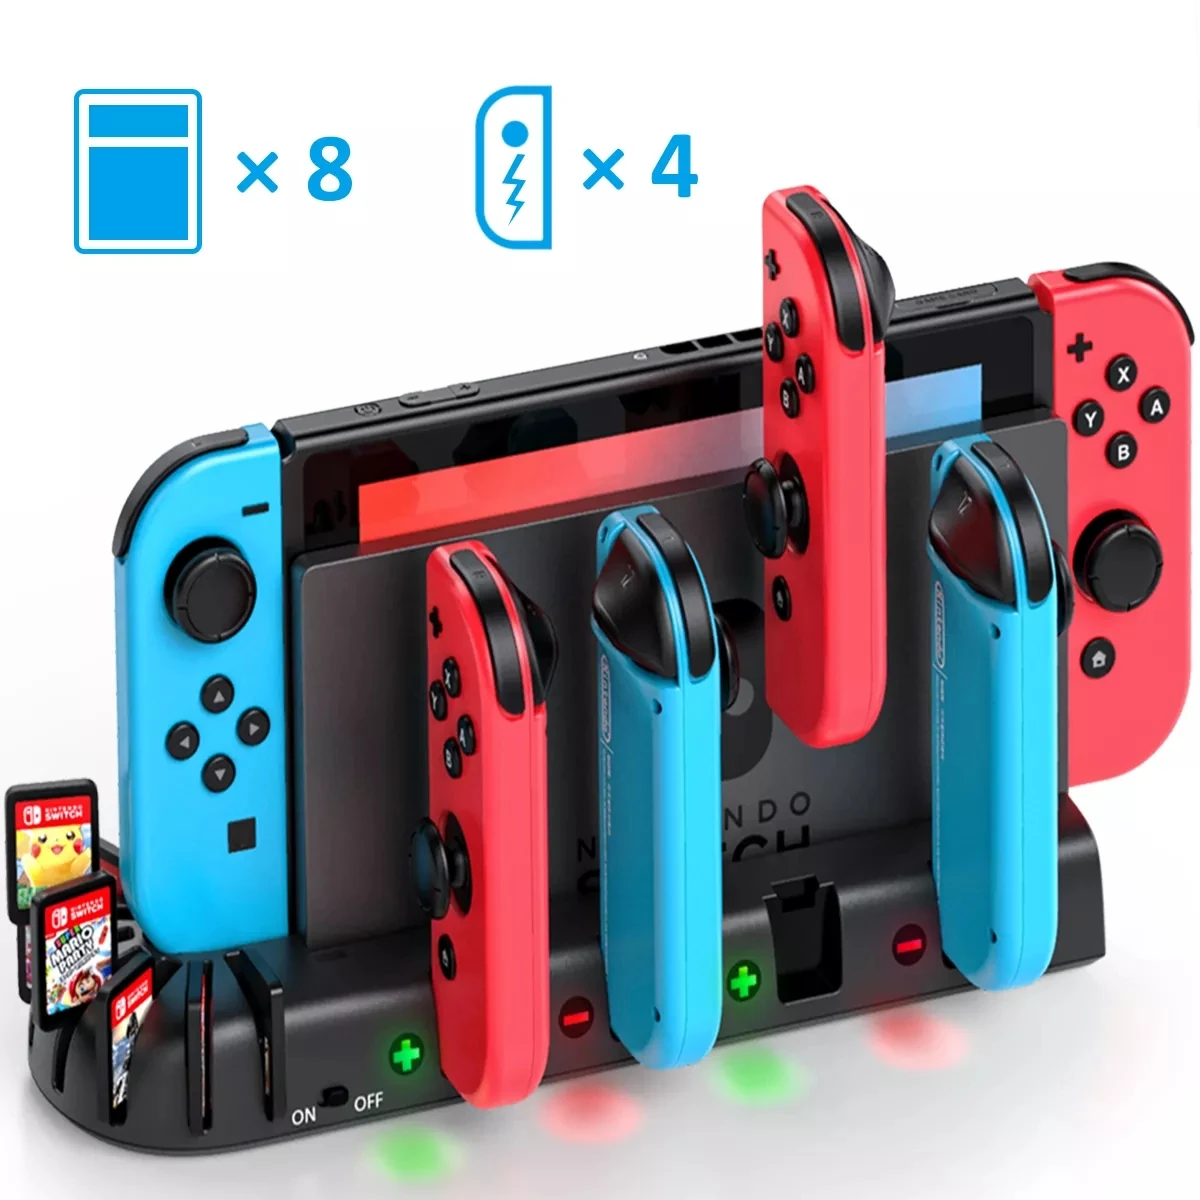 OIVO For Nintend Switch Controller 4 Port Joypads Charging Dock Station for Switch Holder Charger with 8 Game Slots|Chargers| - AliExpress